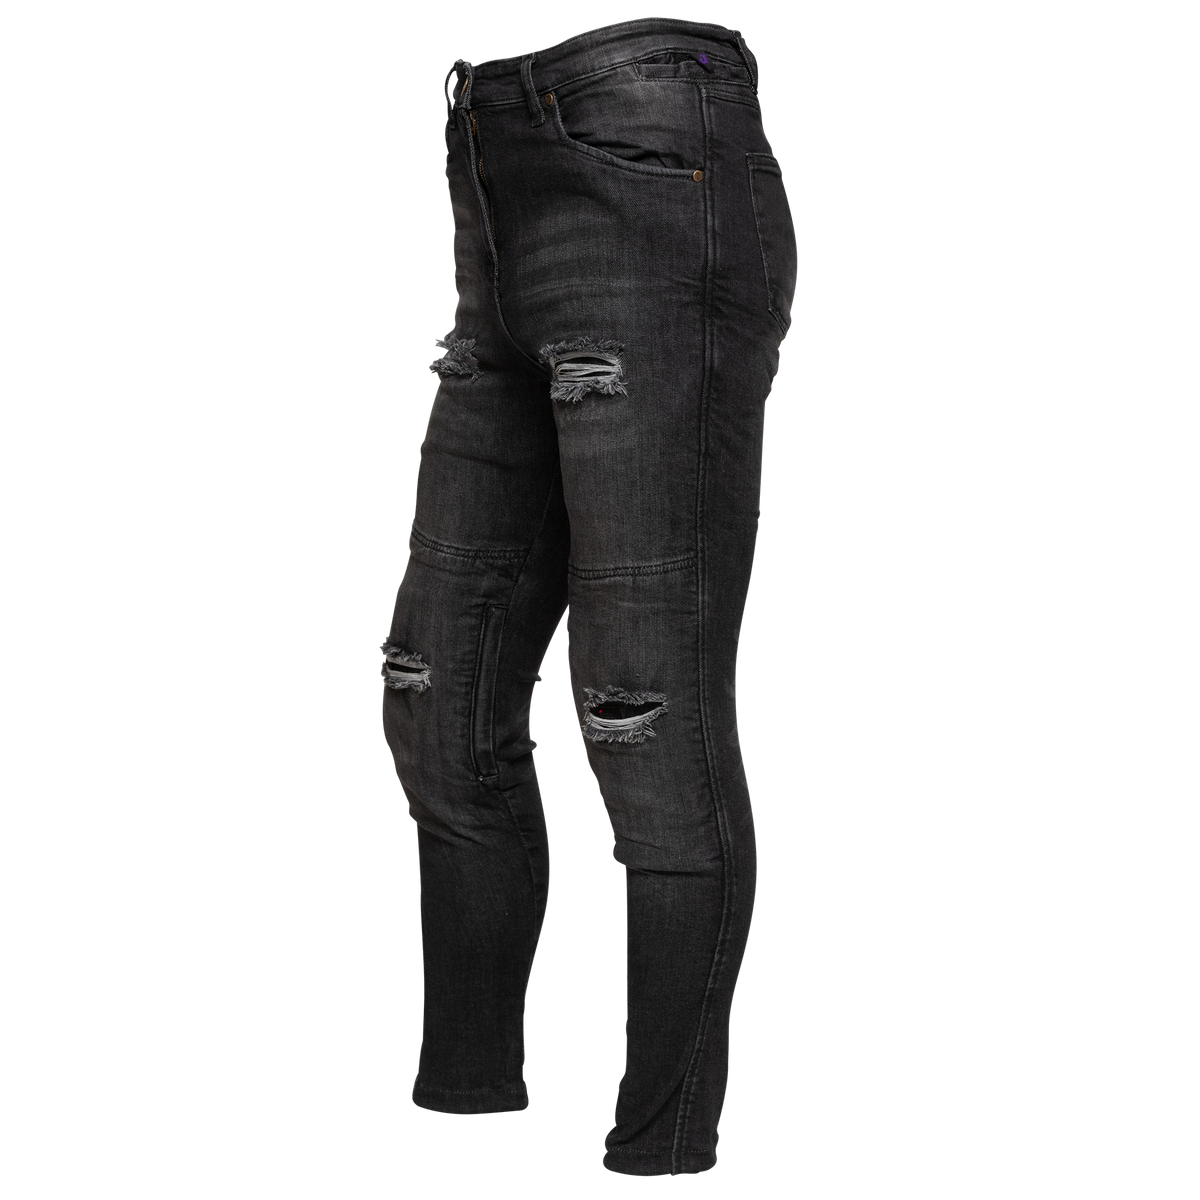 RAVEN Moto - Motorcycle Jeans  Women's High-Waisted REVOLT Ripped Armored  Jeans